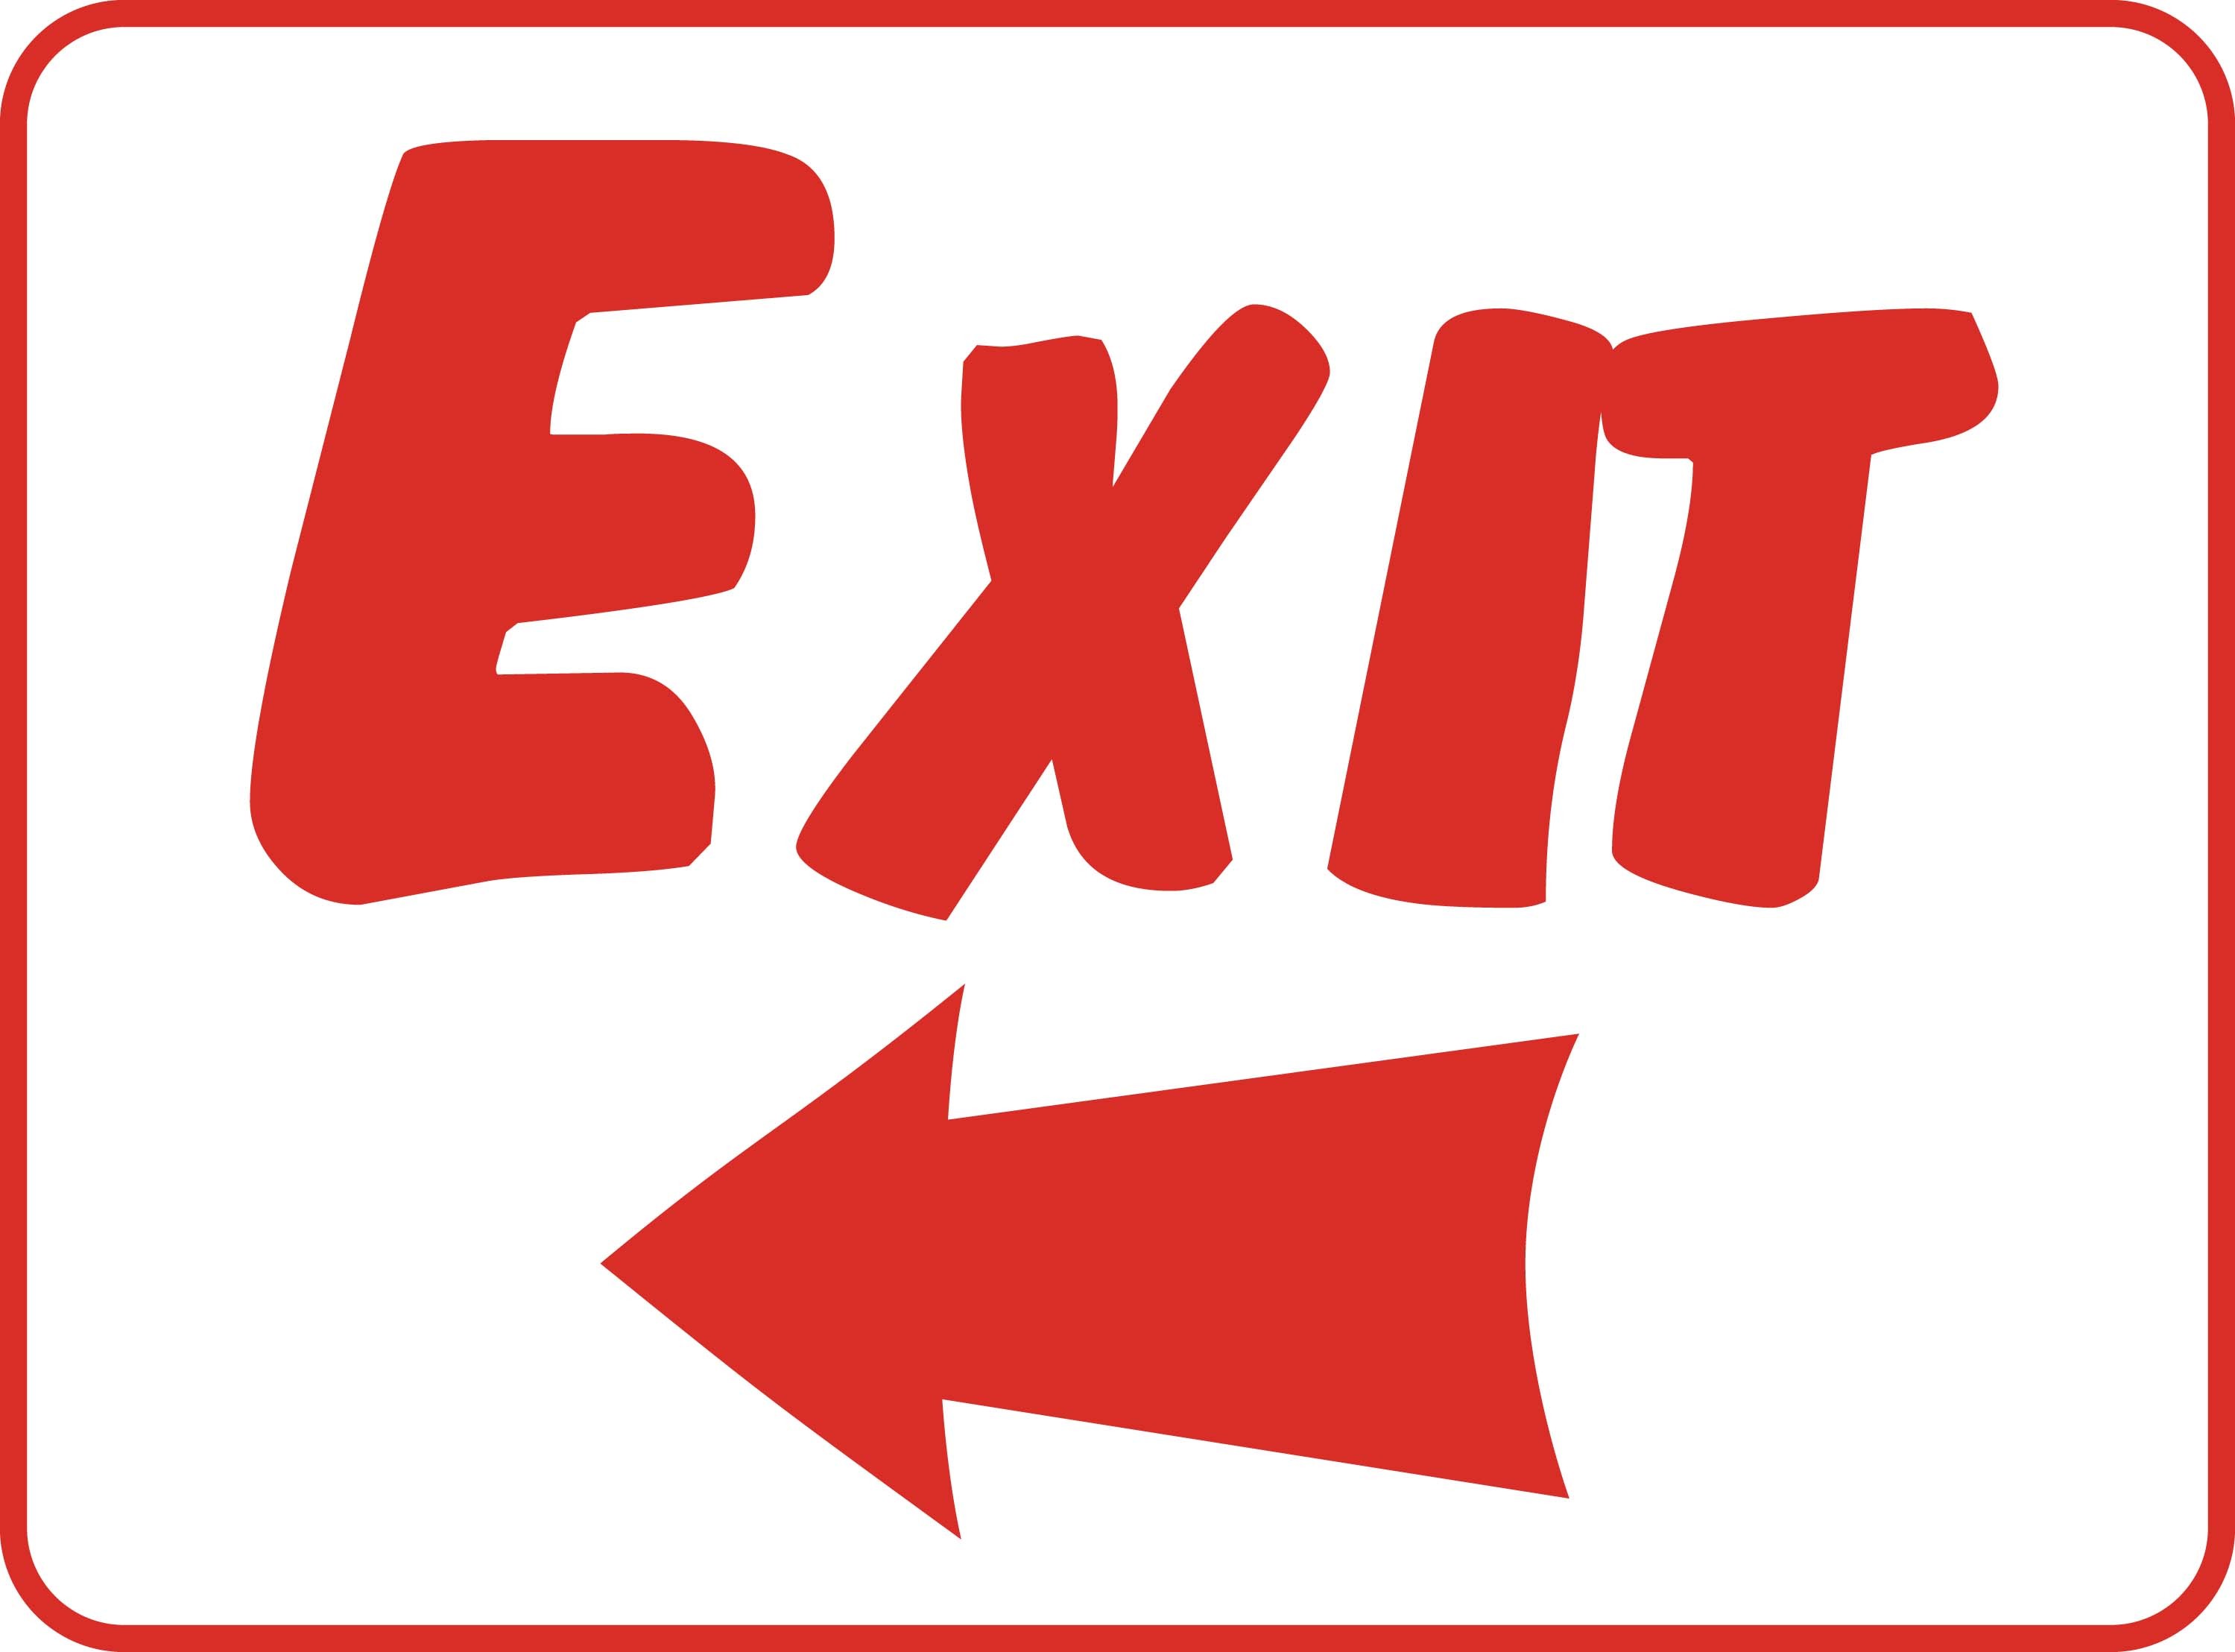 exit clipart free - photo #28